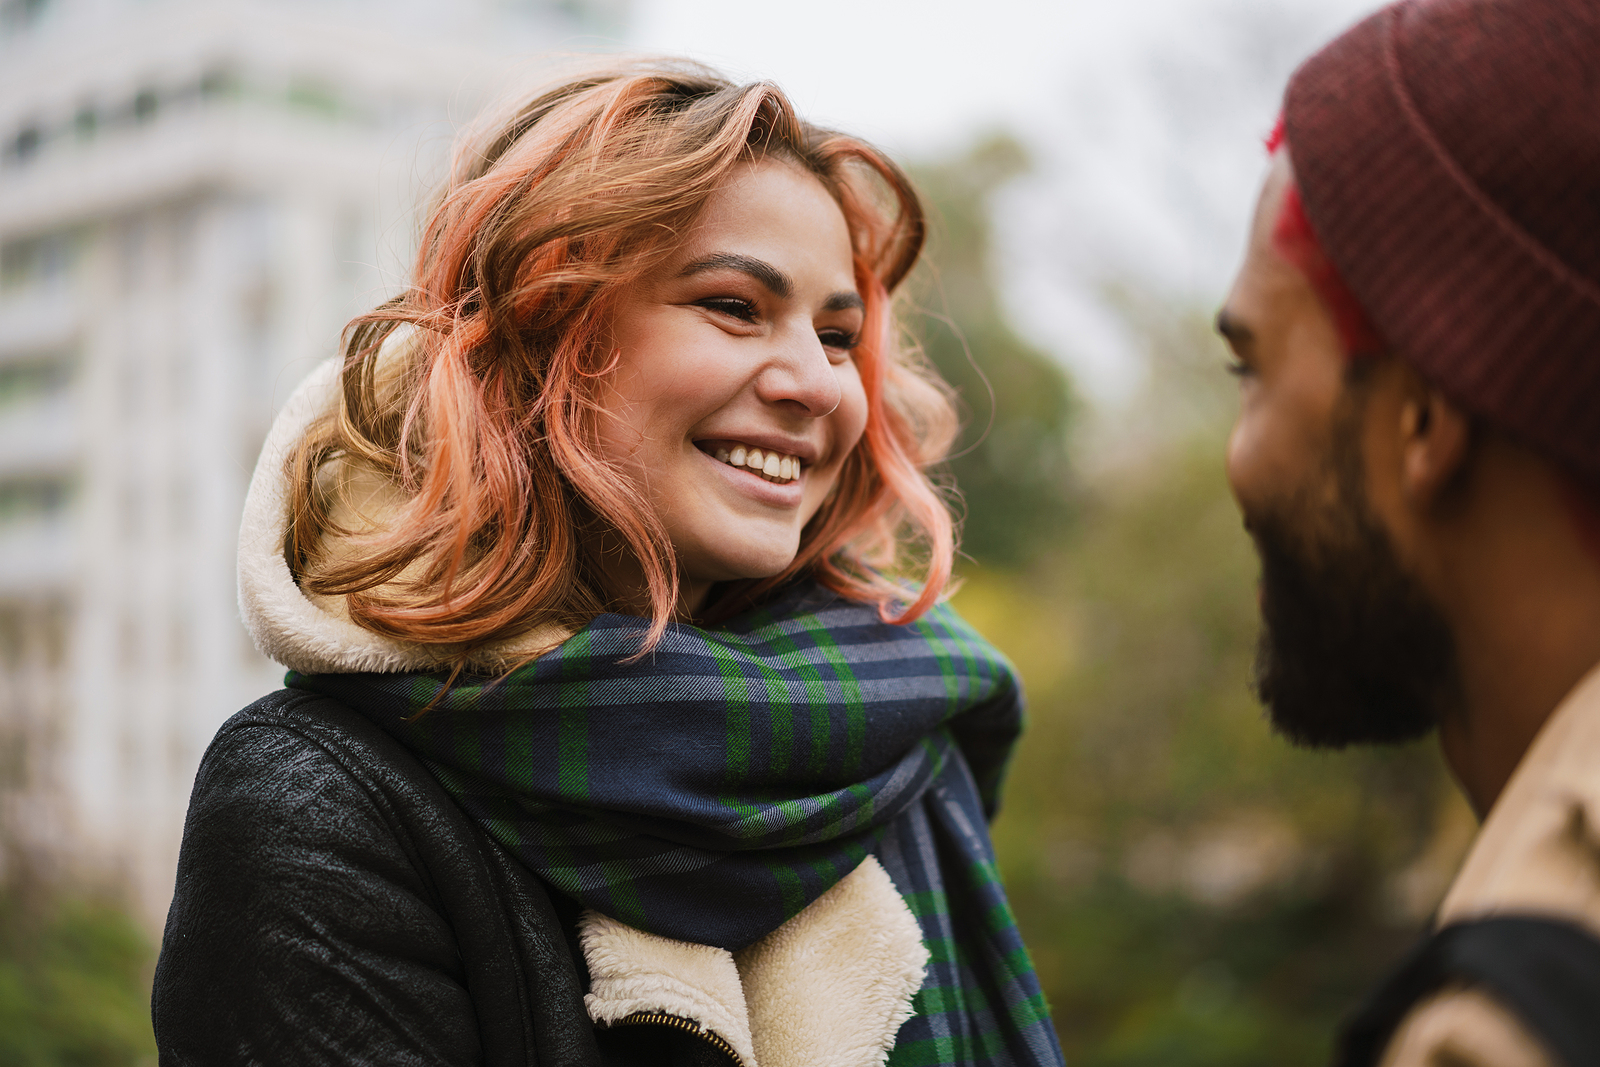 Couple looking at each other. Both smiling and wearing winter clothing.